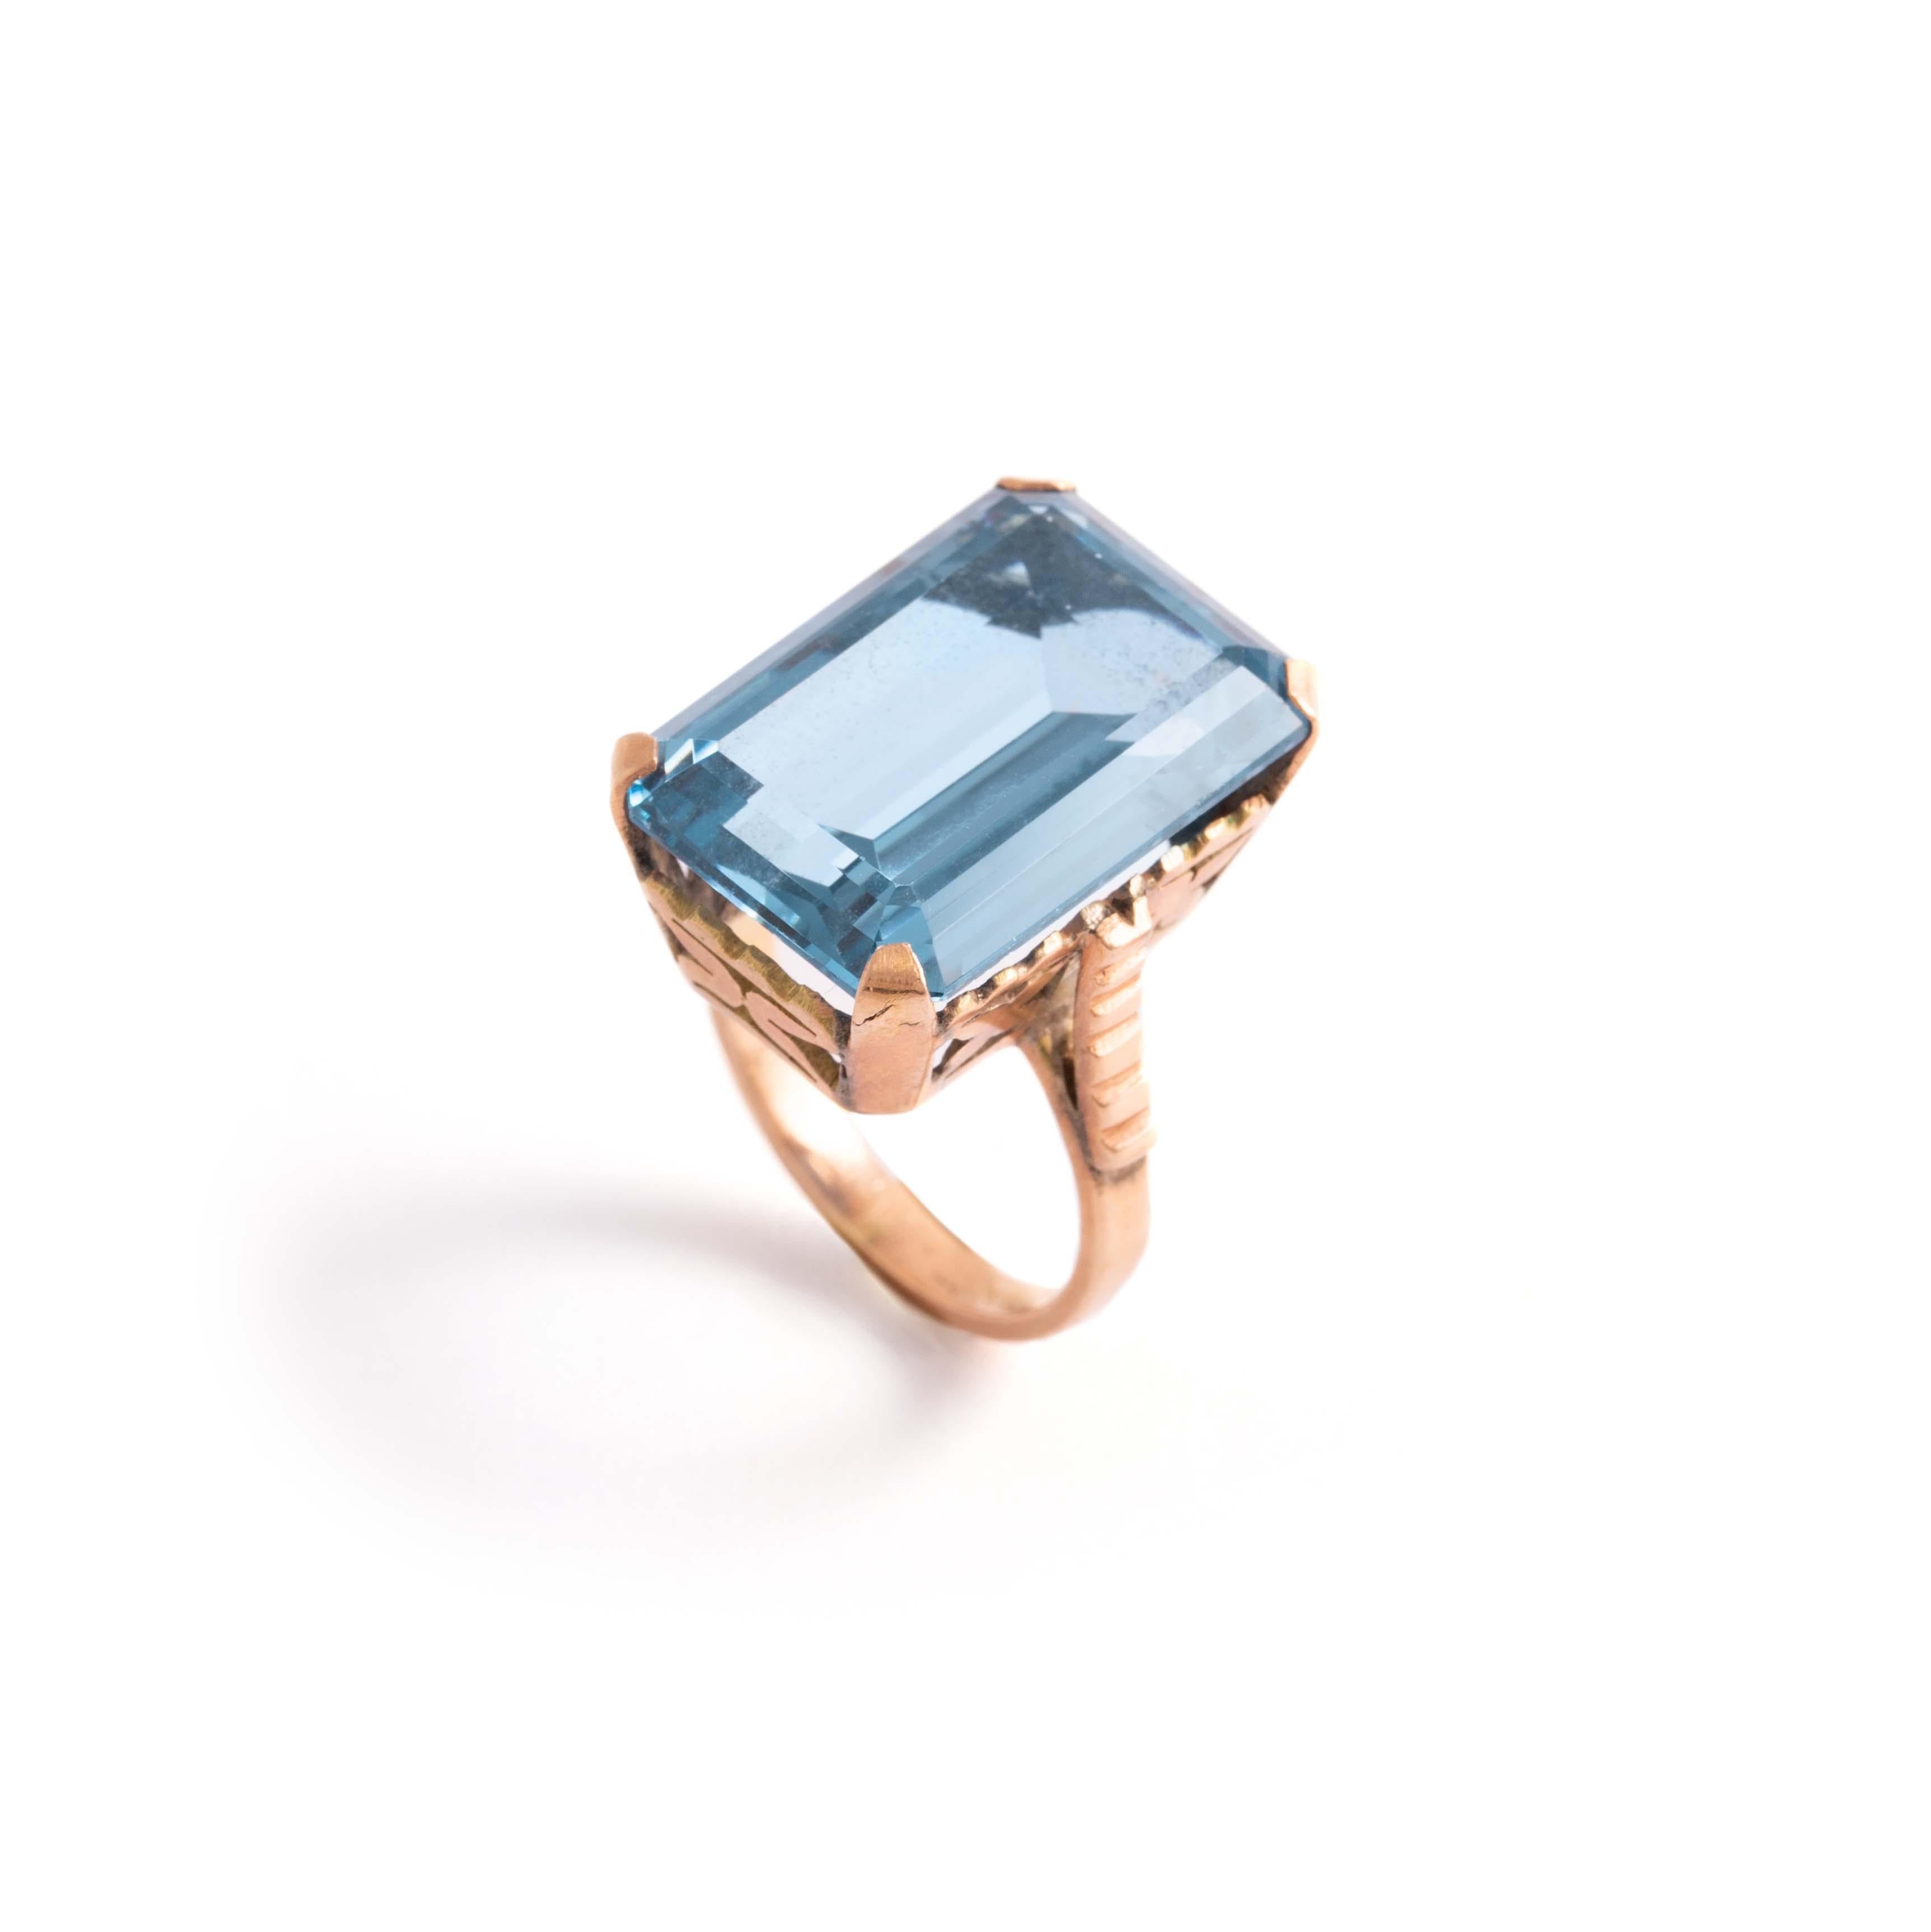 14K gold ring centered by an emerald-cut blue stone.
Stone's dimensions: 20.46 x 14.20 x 8.06 mm. 
Gross weight: 10.11 grams.